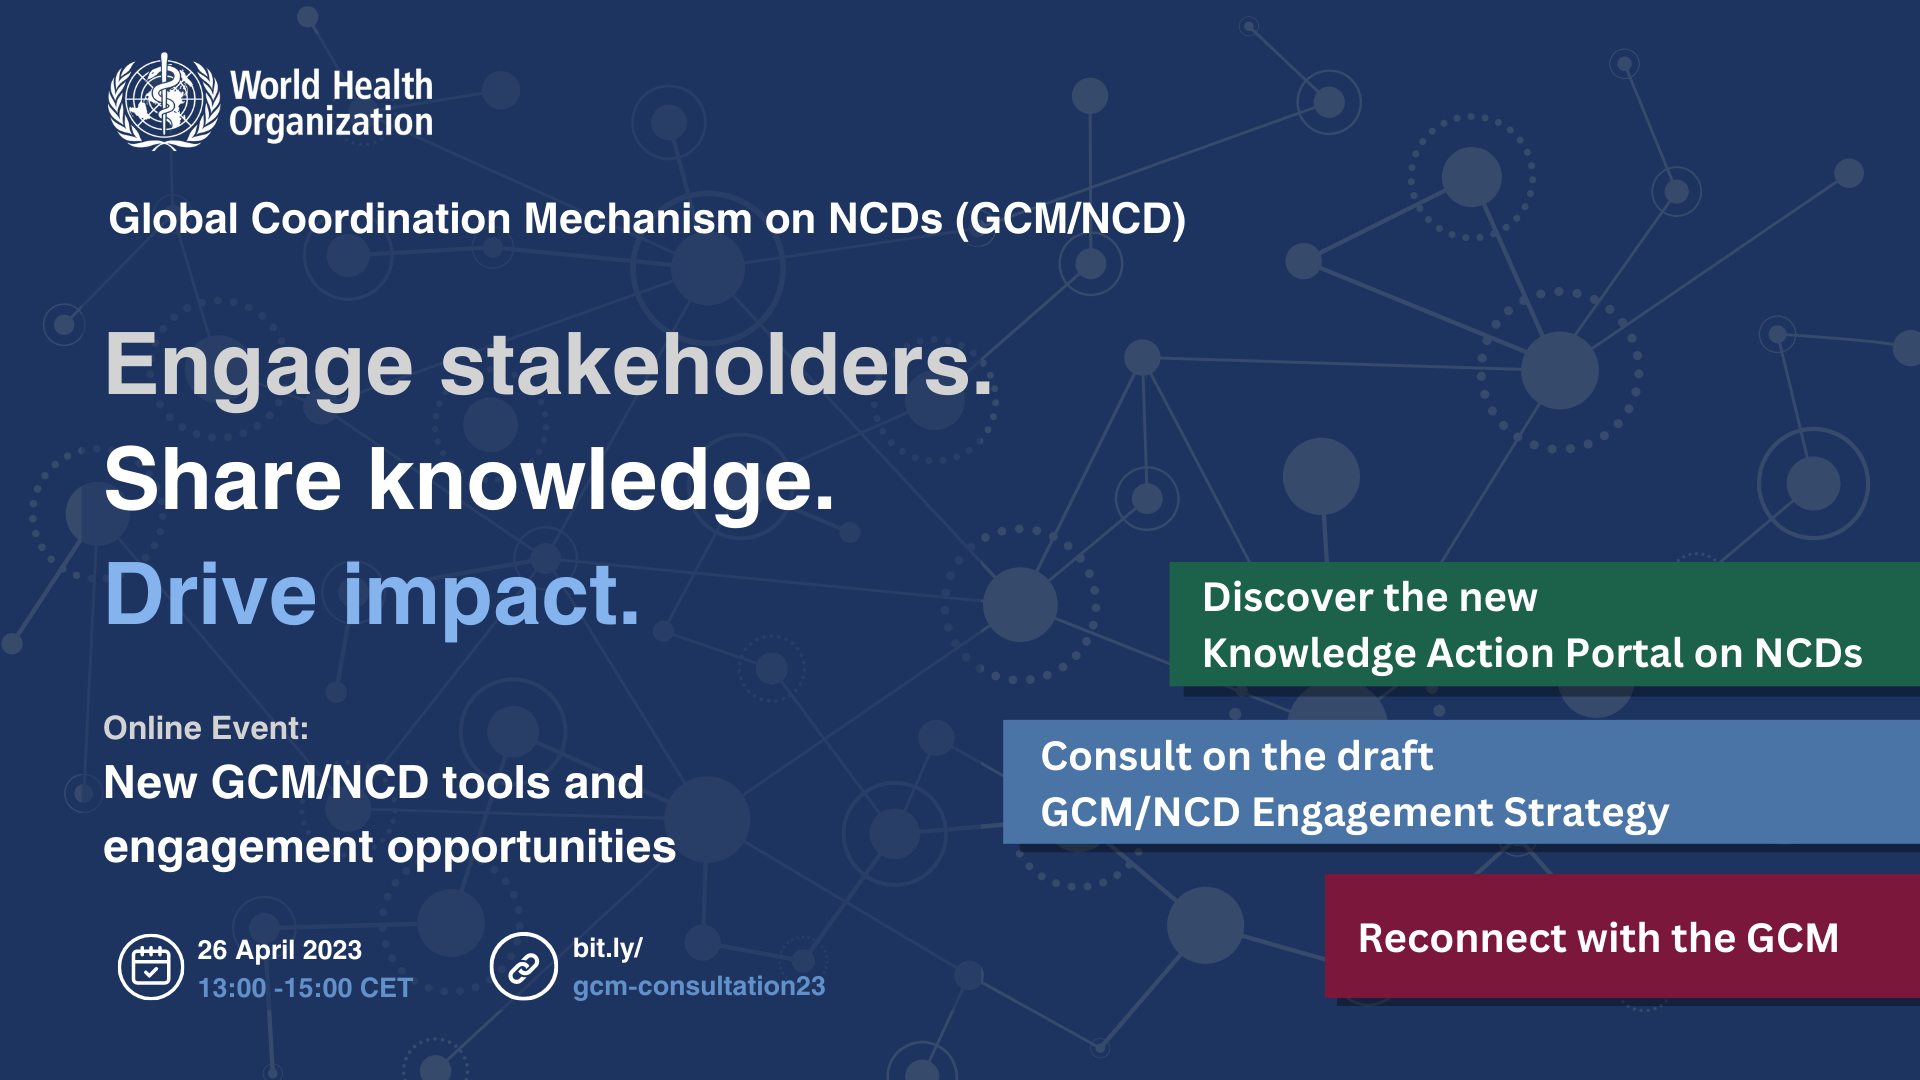 Launch of the new Knowledge Action Portal on NCDs (KAP) and consultation on the draft GCM Engagement Strategy